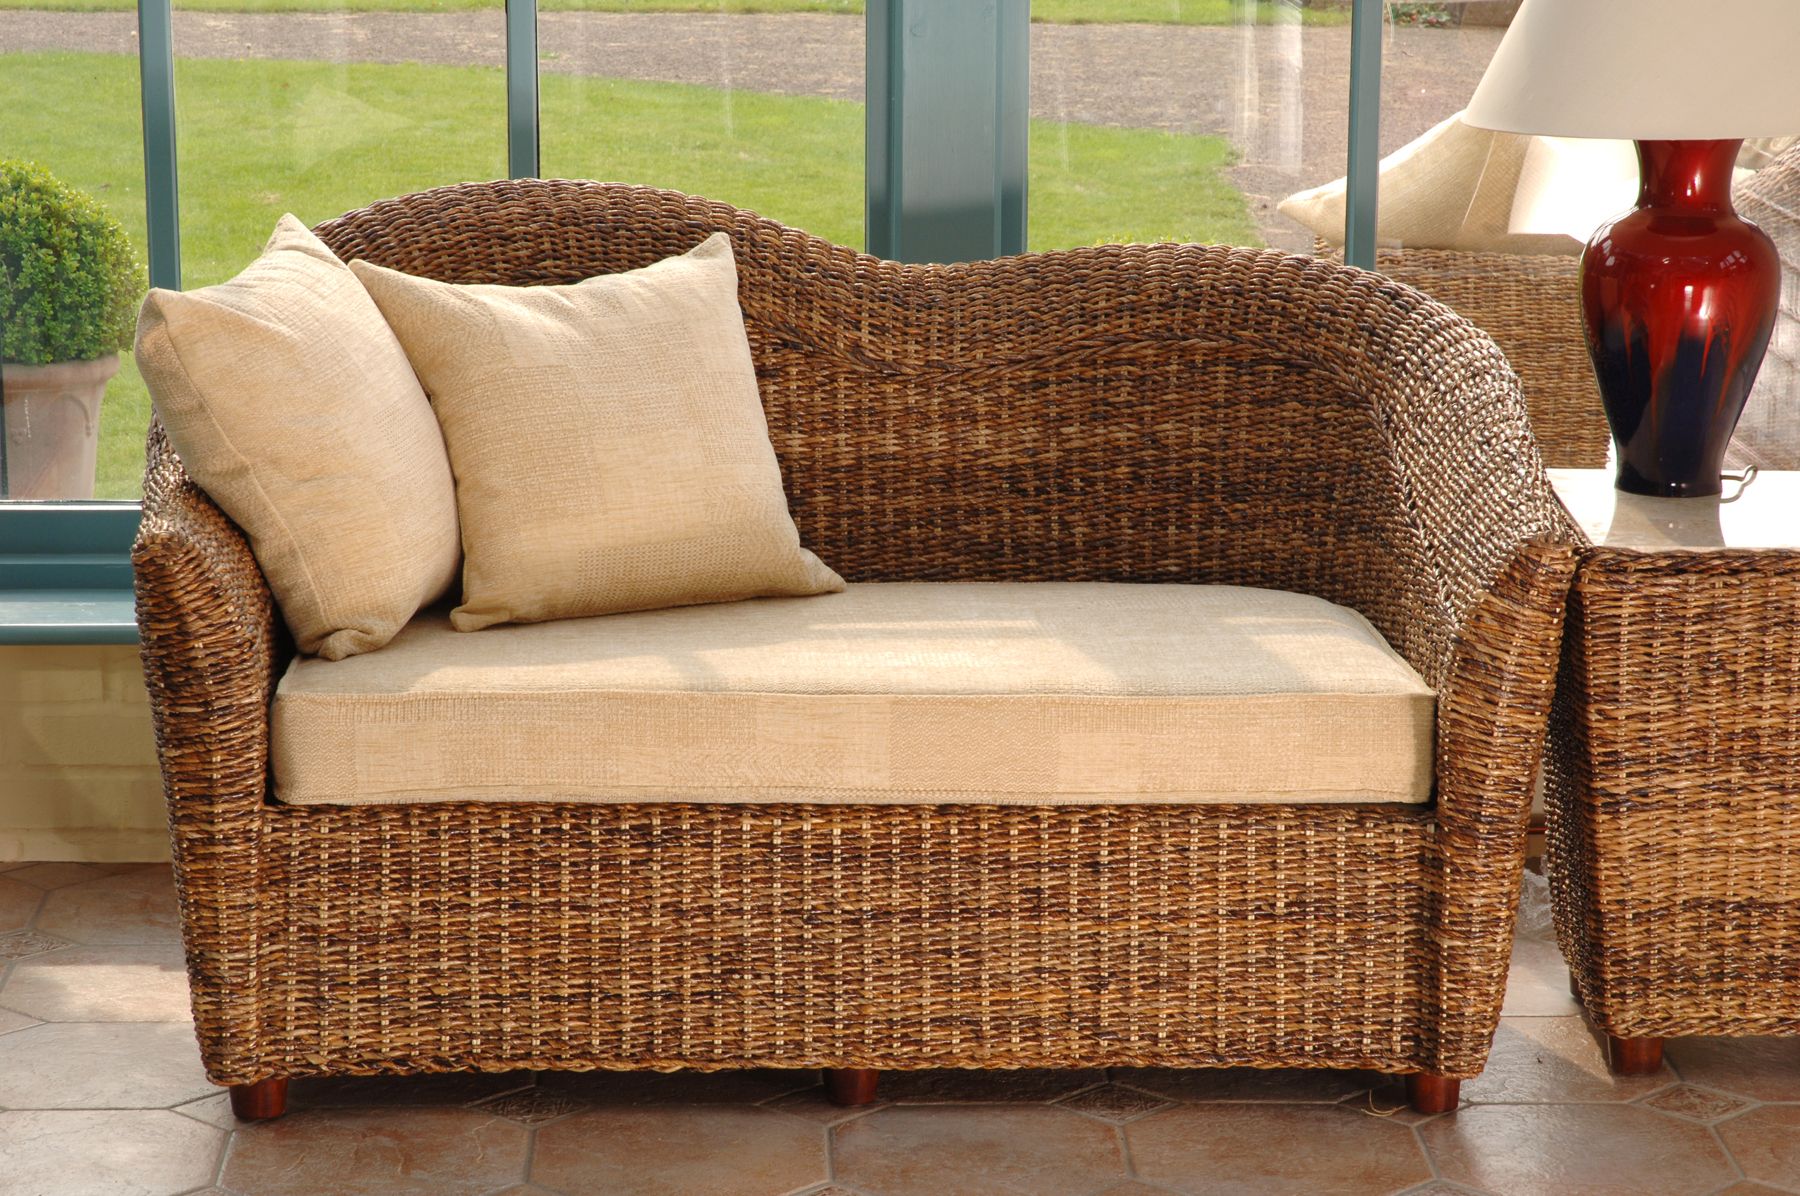 Cane Conservatory Furniture|banana Leaf Furniture|cane Intended For Natural Woven Banana Console Tables (View 15 of 20)